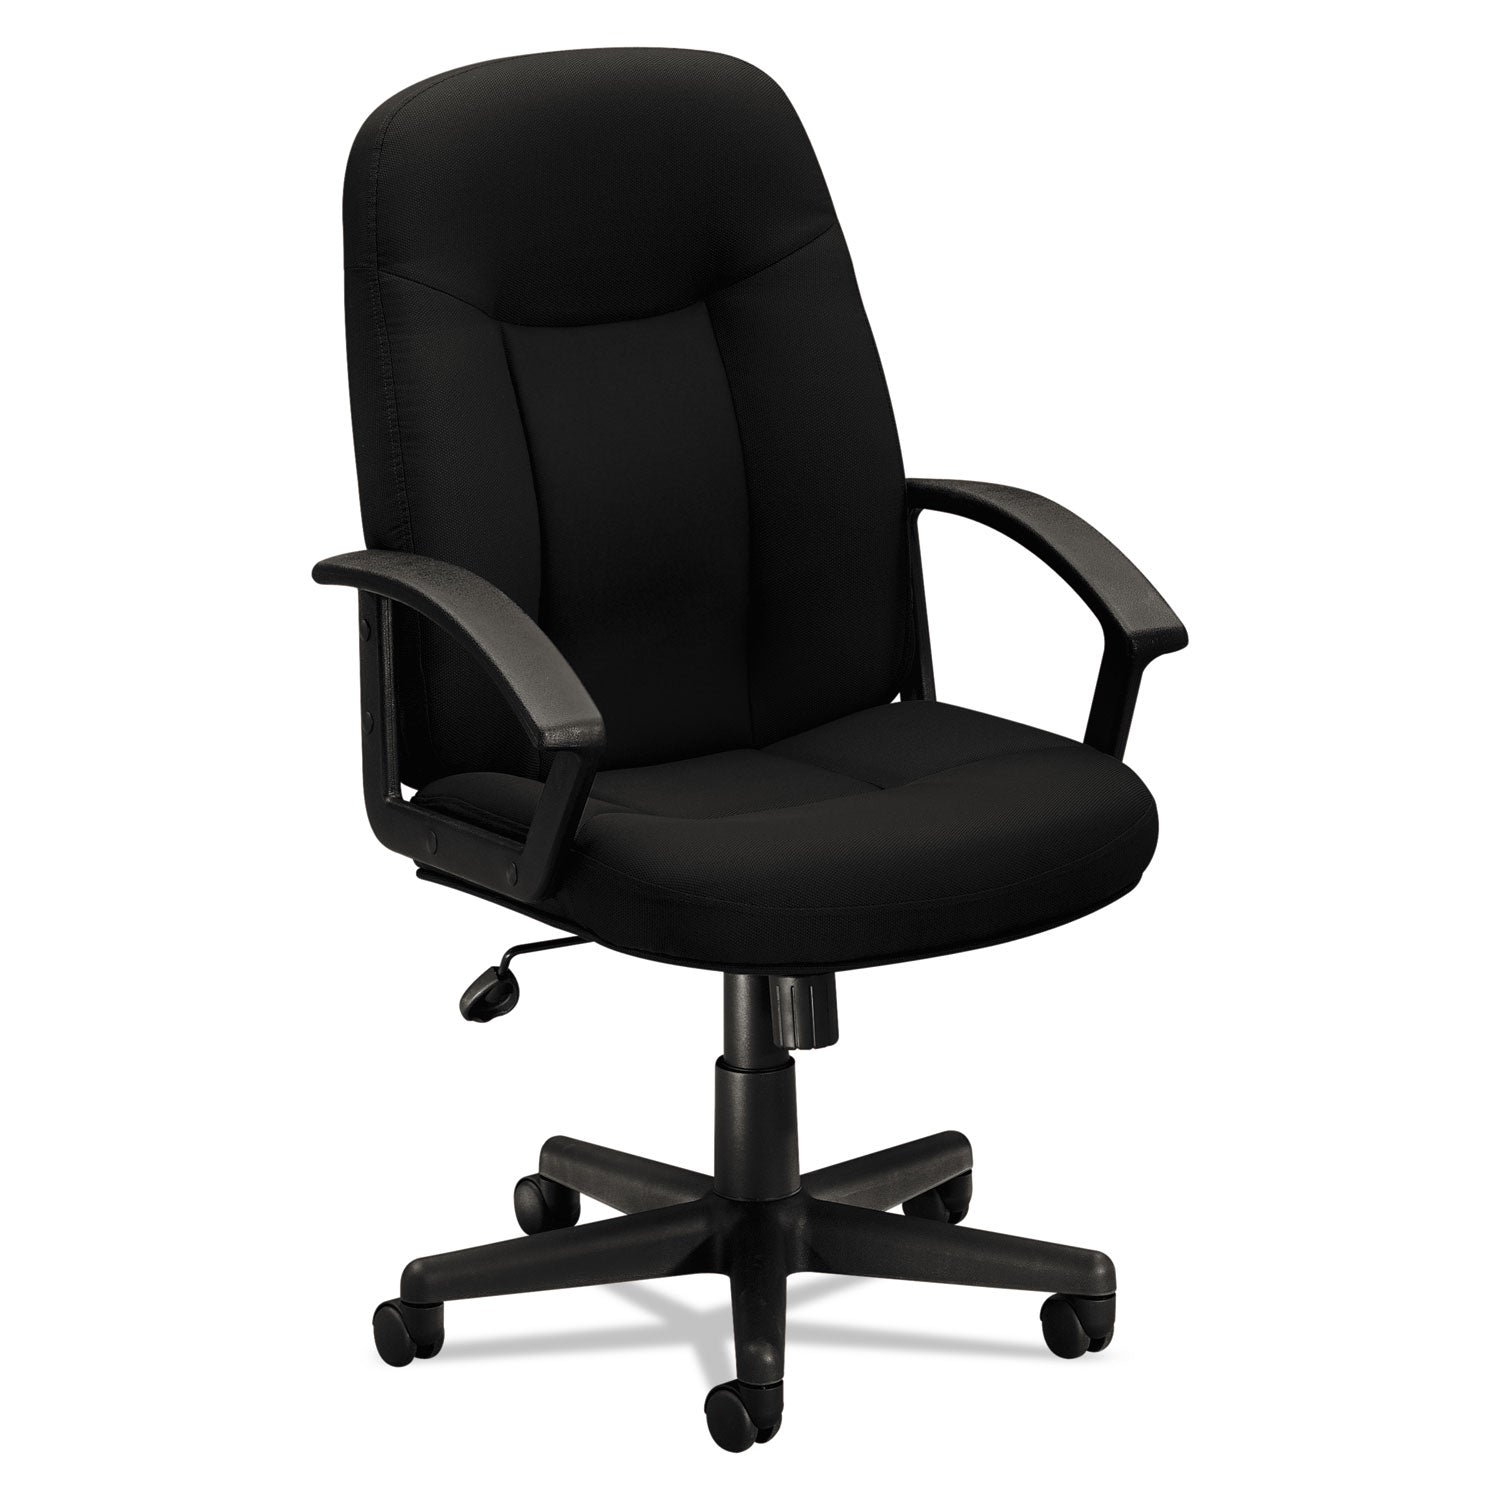 HVL601 Series Executive High-Back Chair, Supports Up to 250 lb, 17.44" to 20.94" Seat Height, Black - 